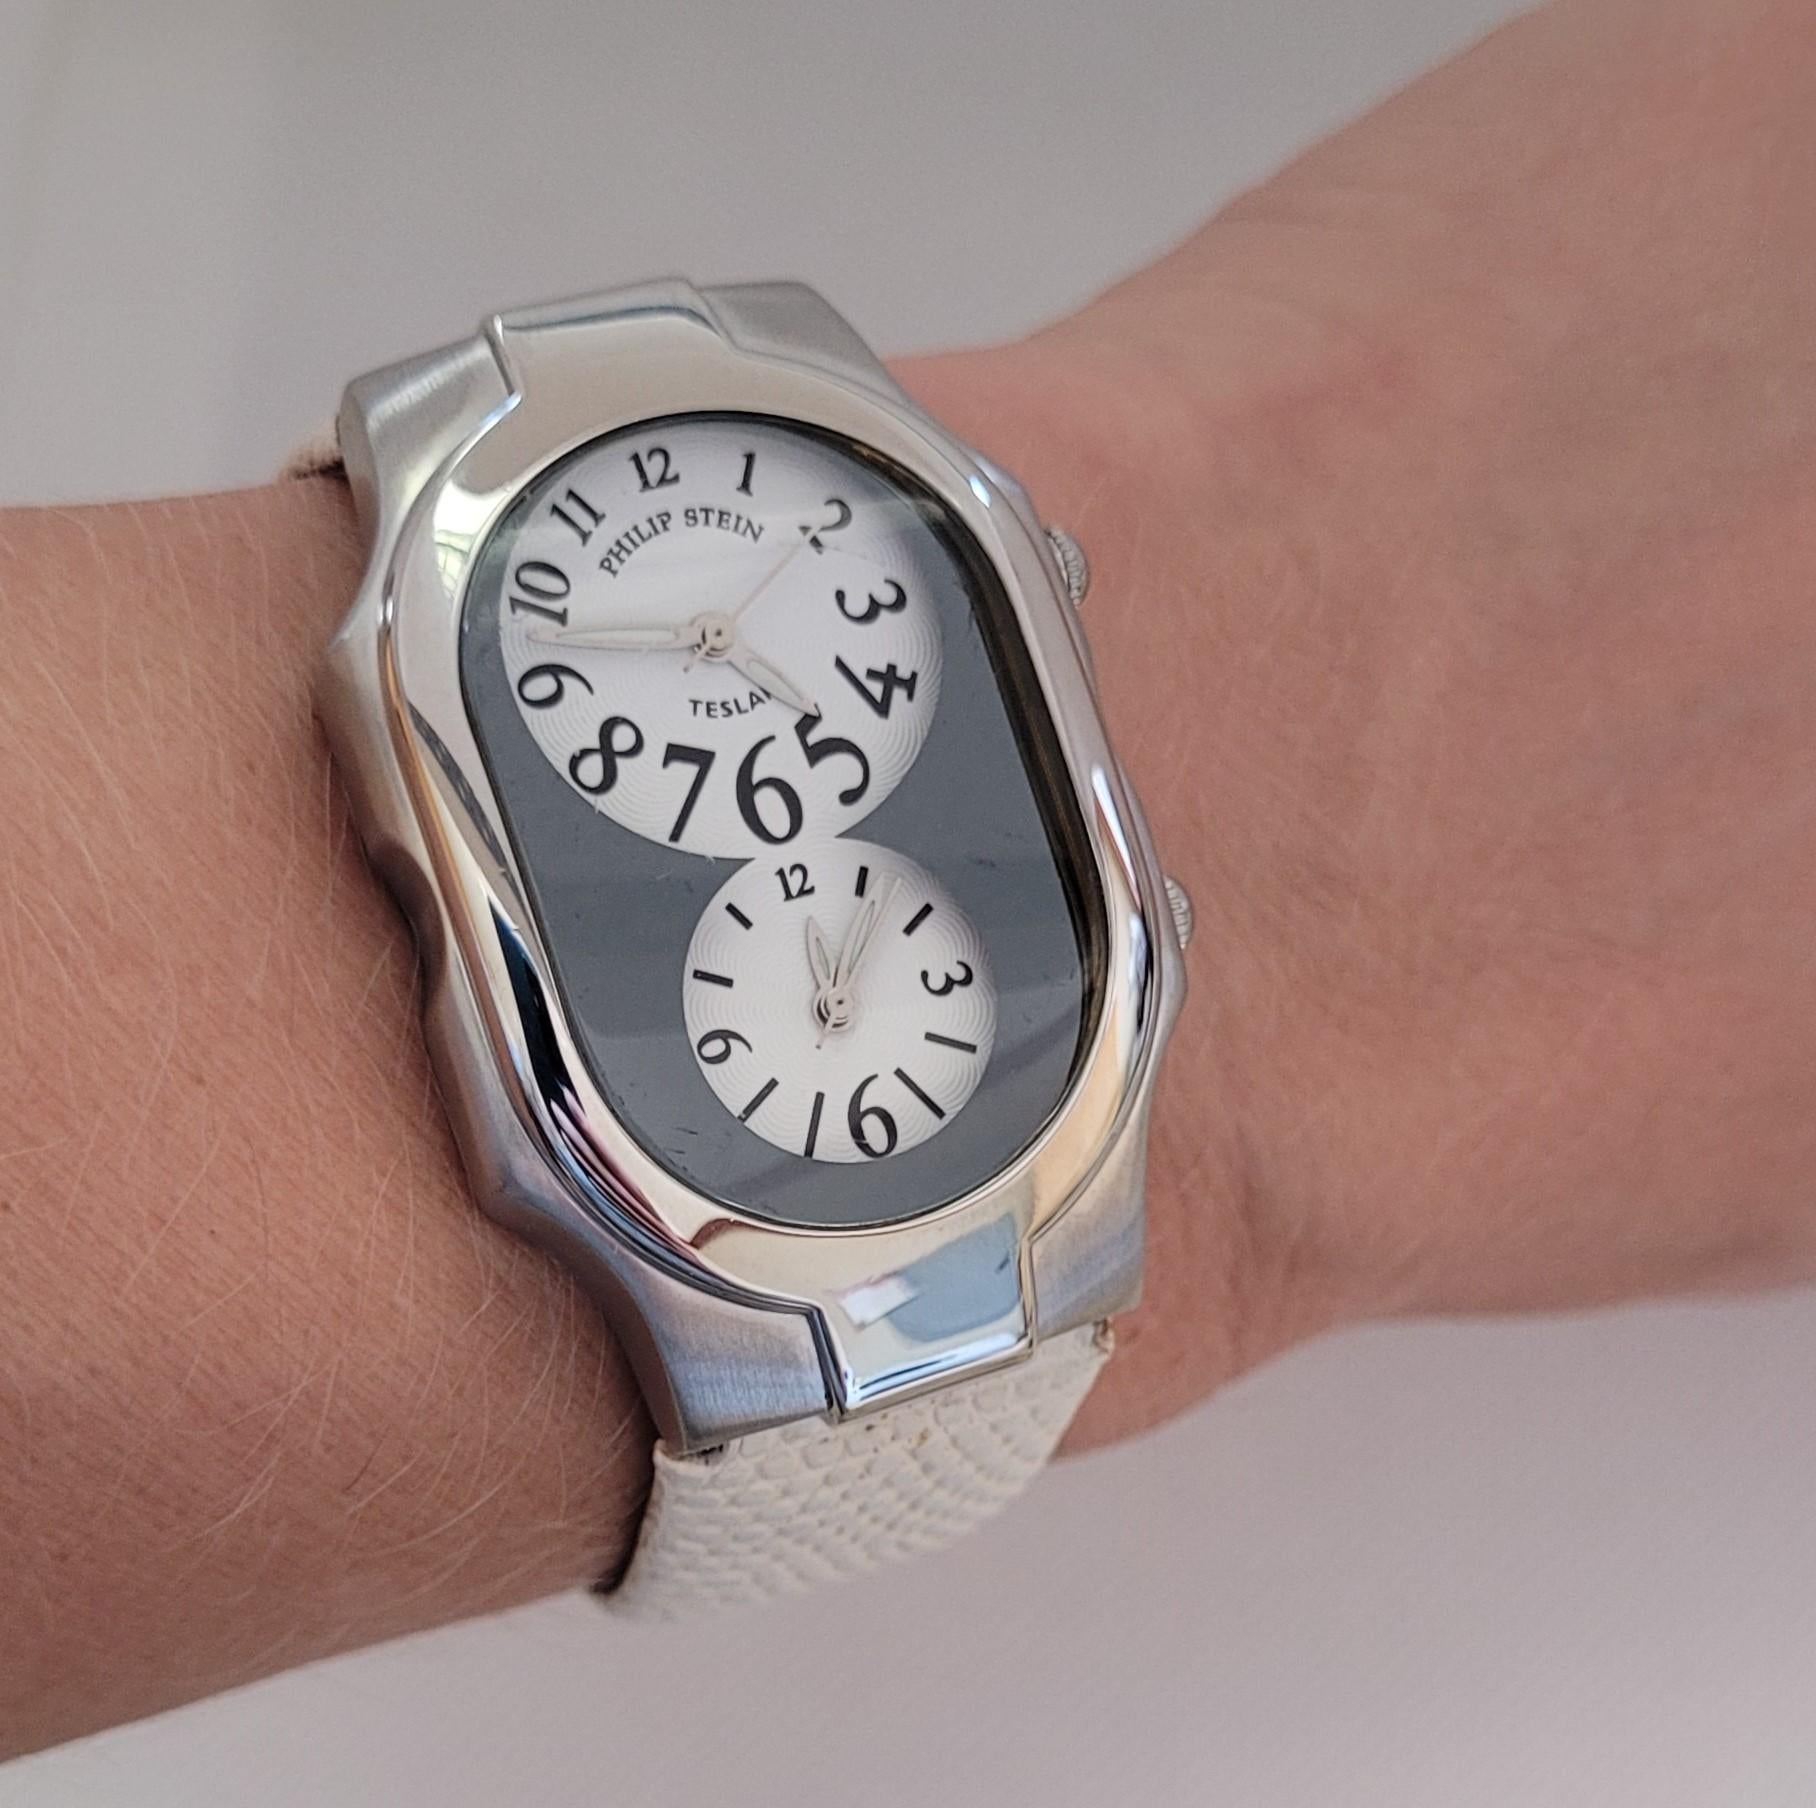 Philp Stein Teslar watch with a dual watch face and white leather strap. The case has a polished and satin finish and is 48mm x 30mm x 10mm in size with a two-tone gray and white face. The crystal has light scratches that are not obvious. The case